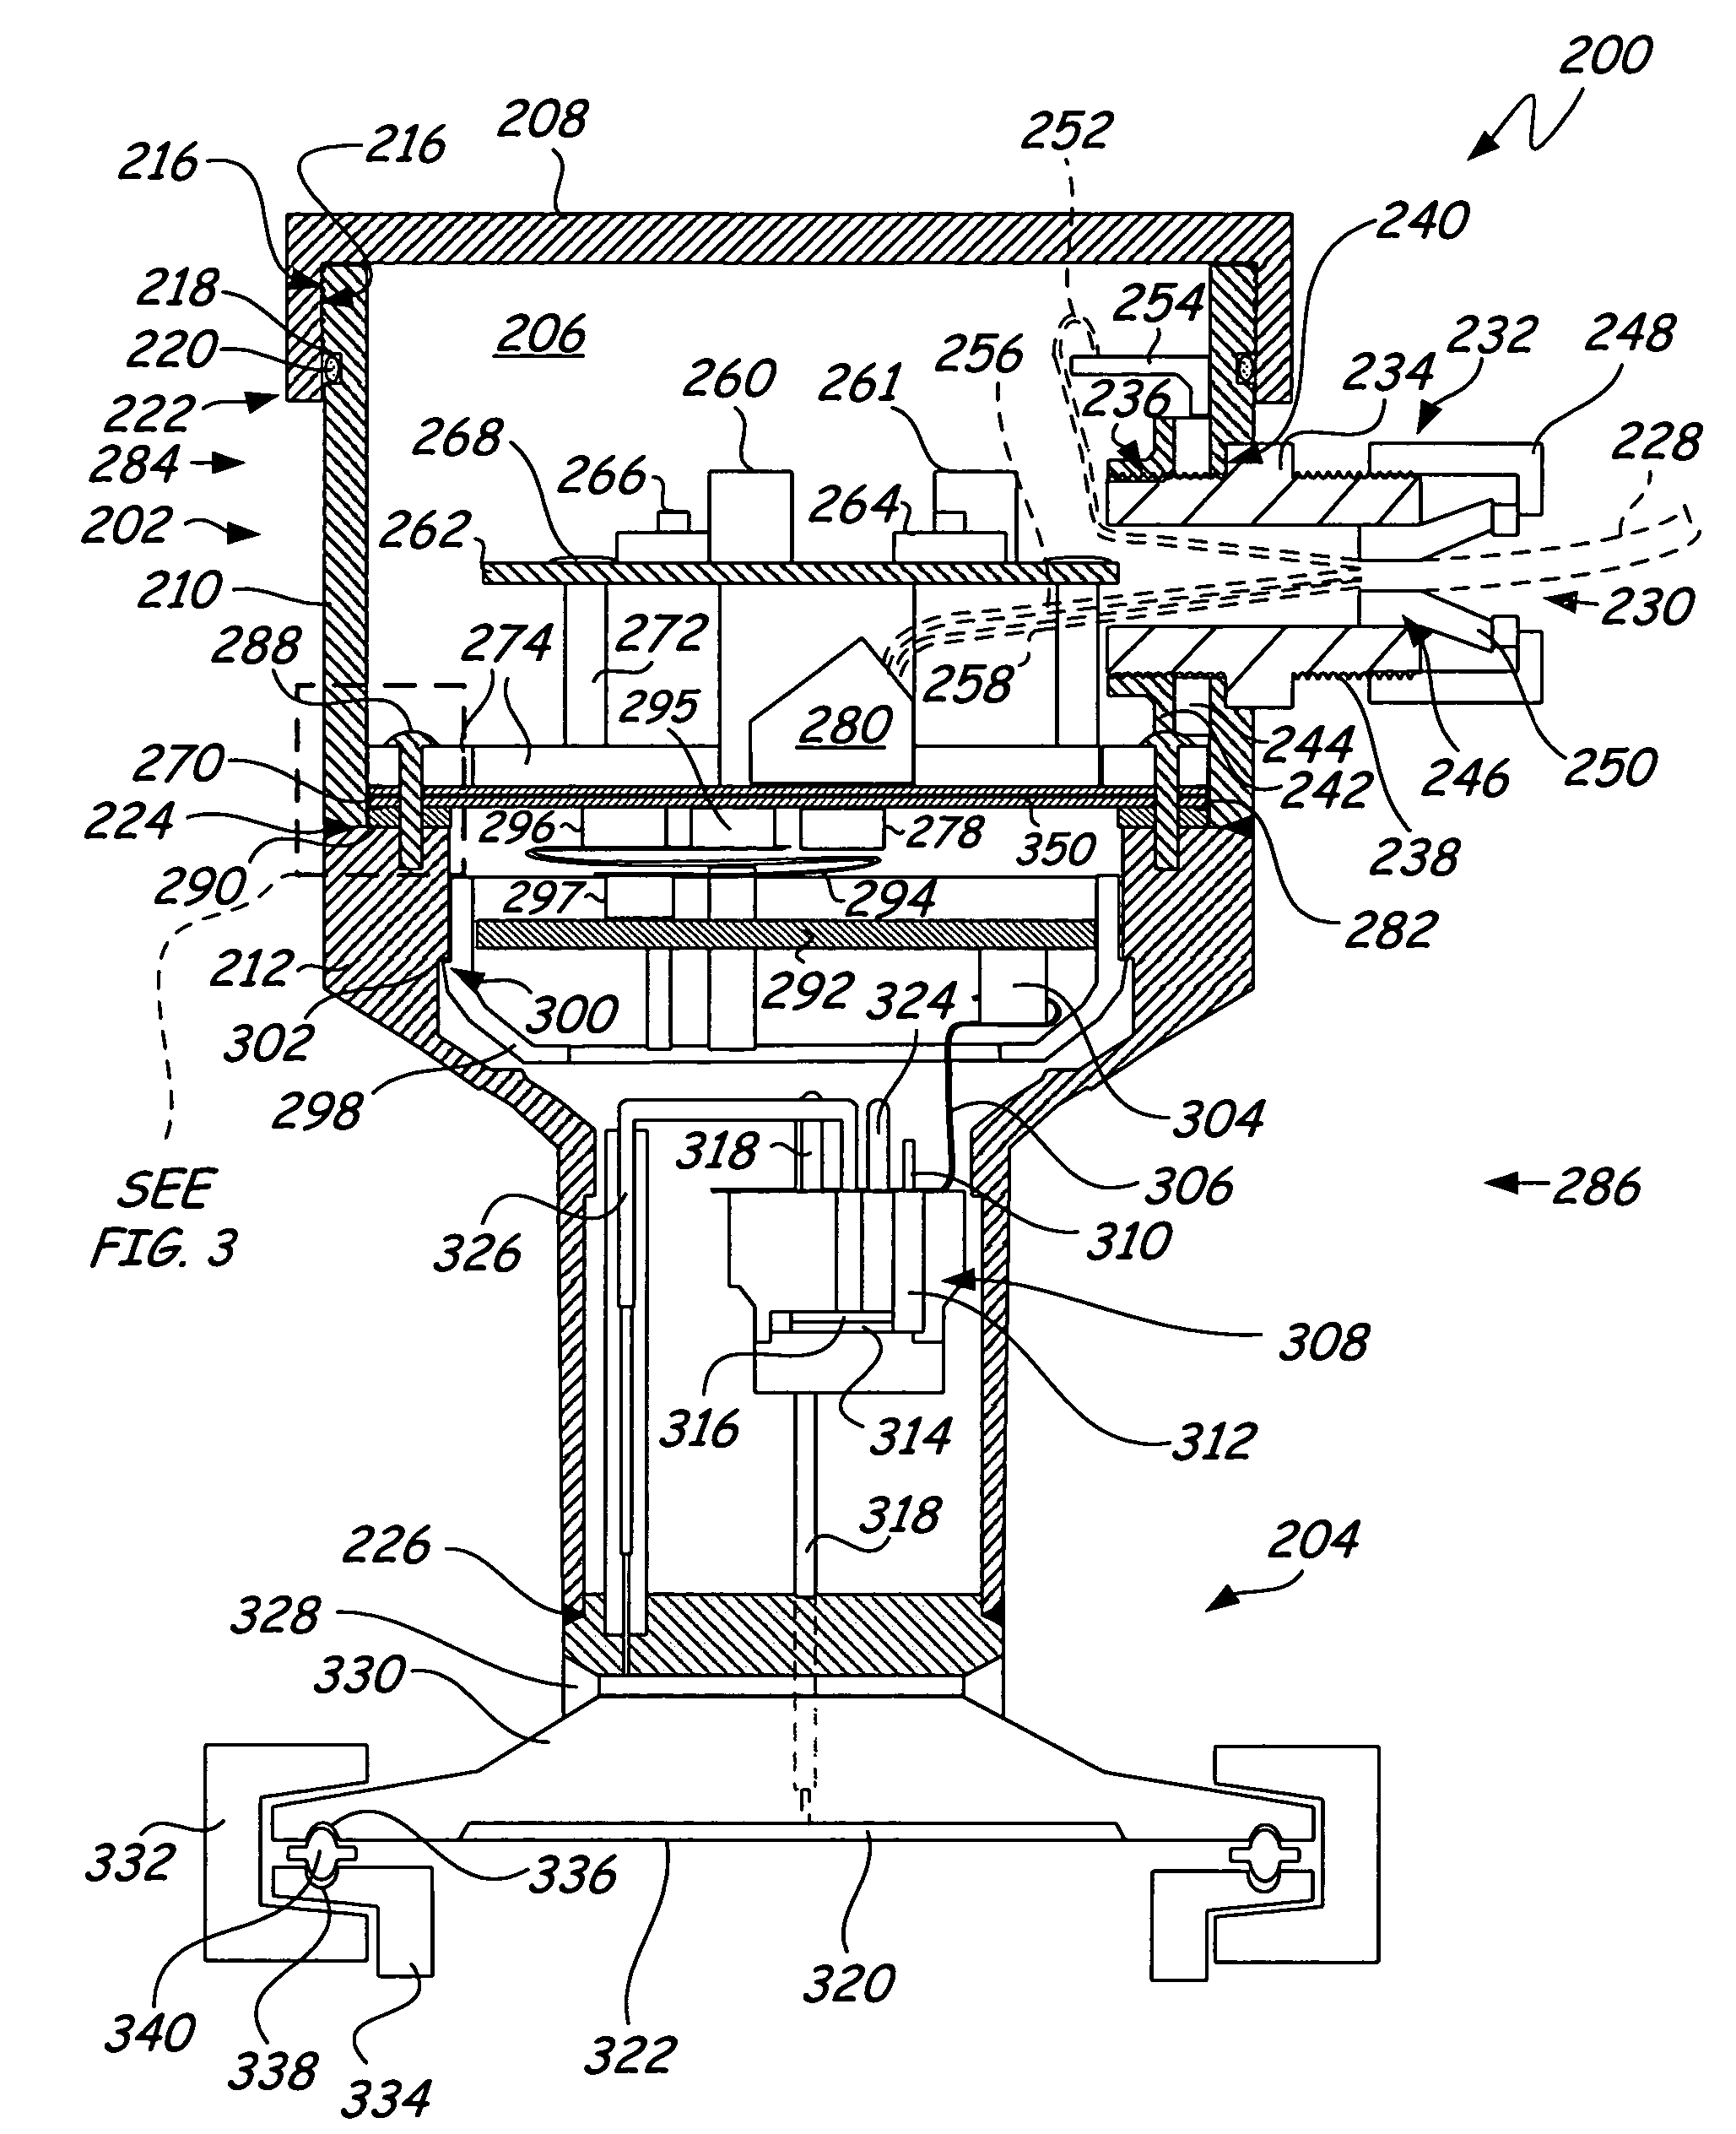 Field device incorporating circuit card assembly as environmental and EMI/RFI shield